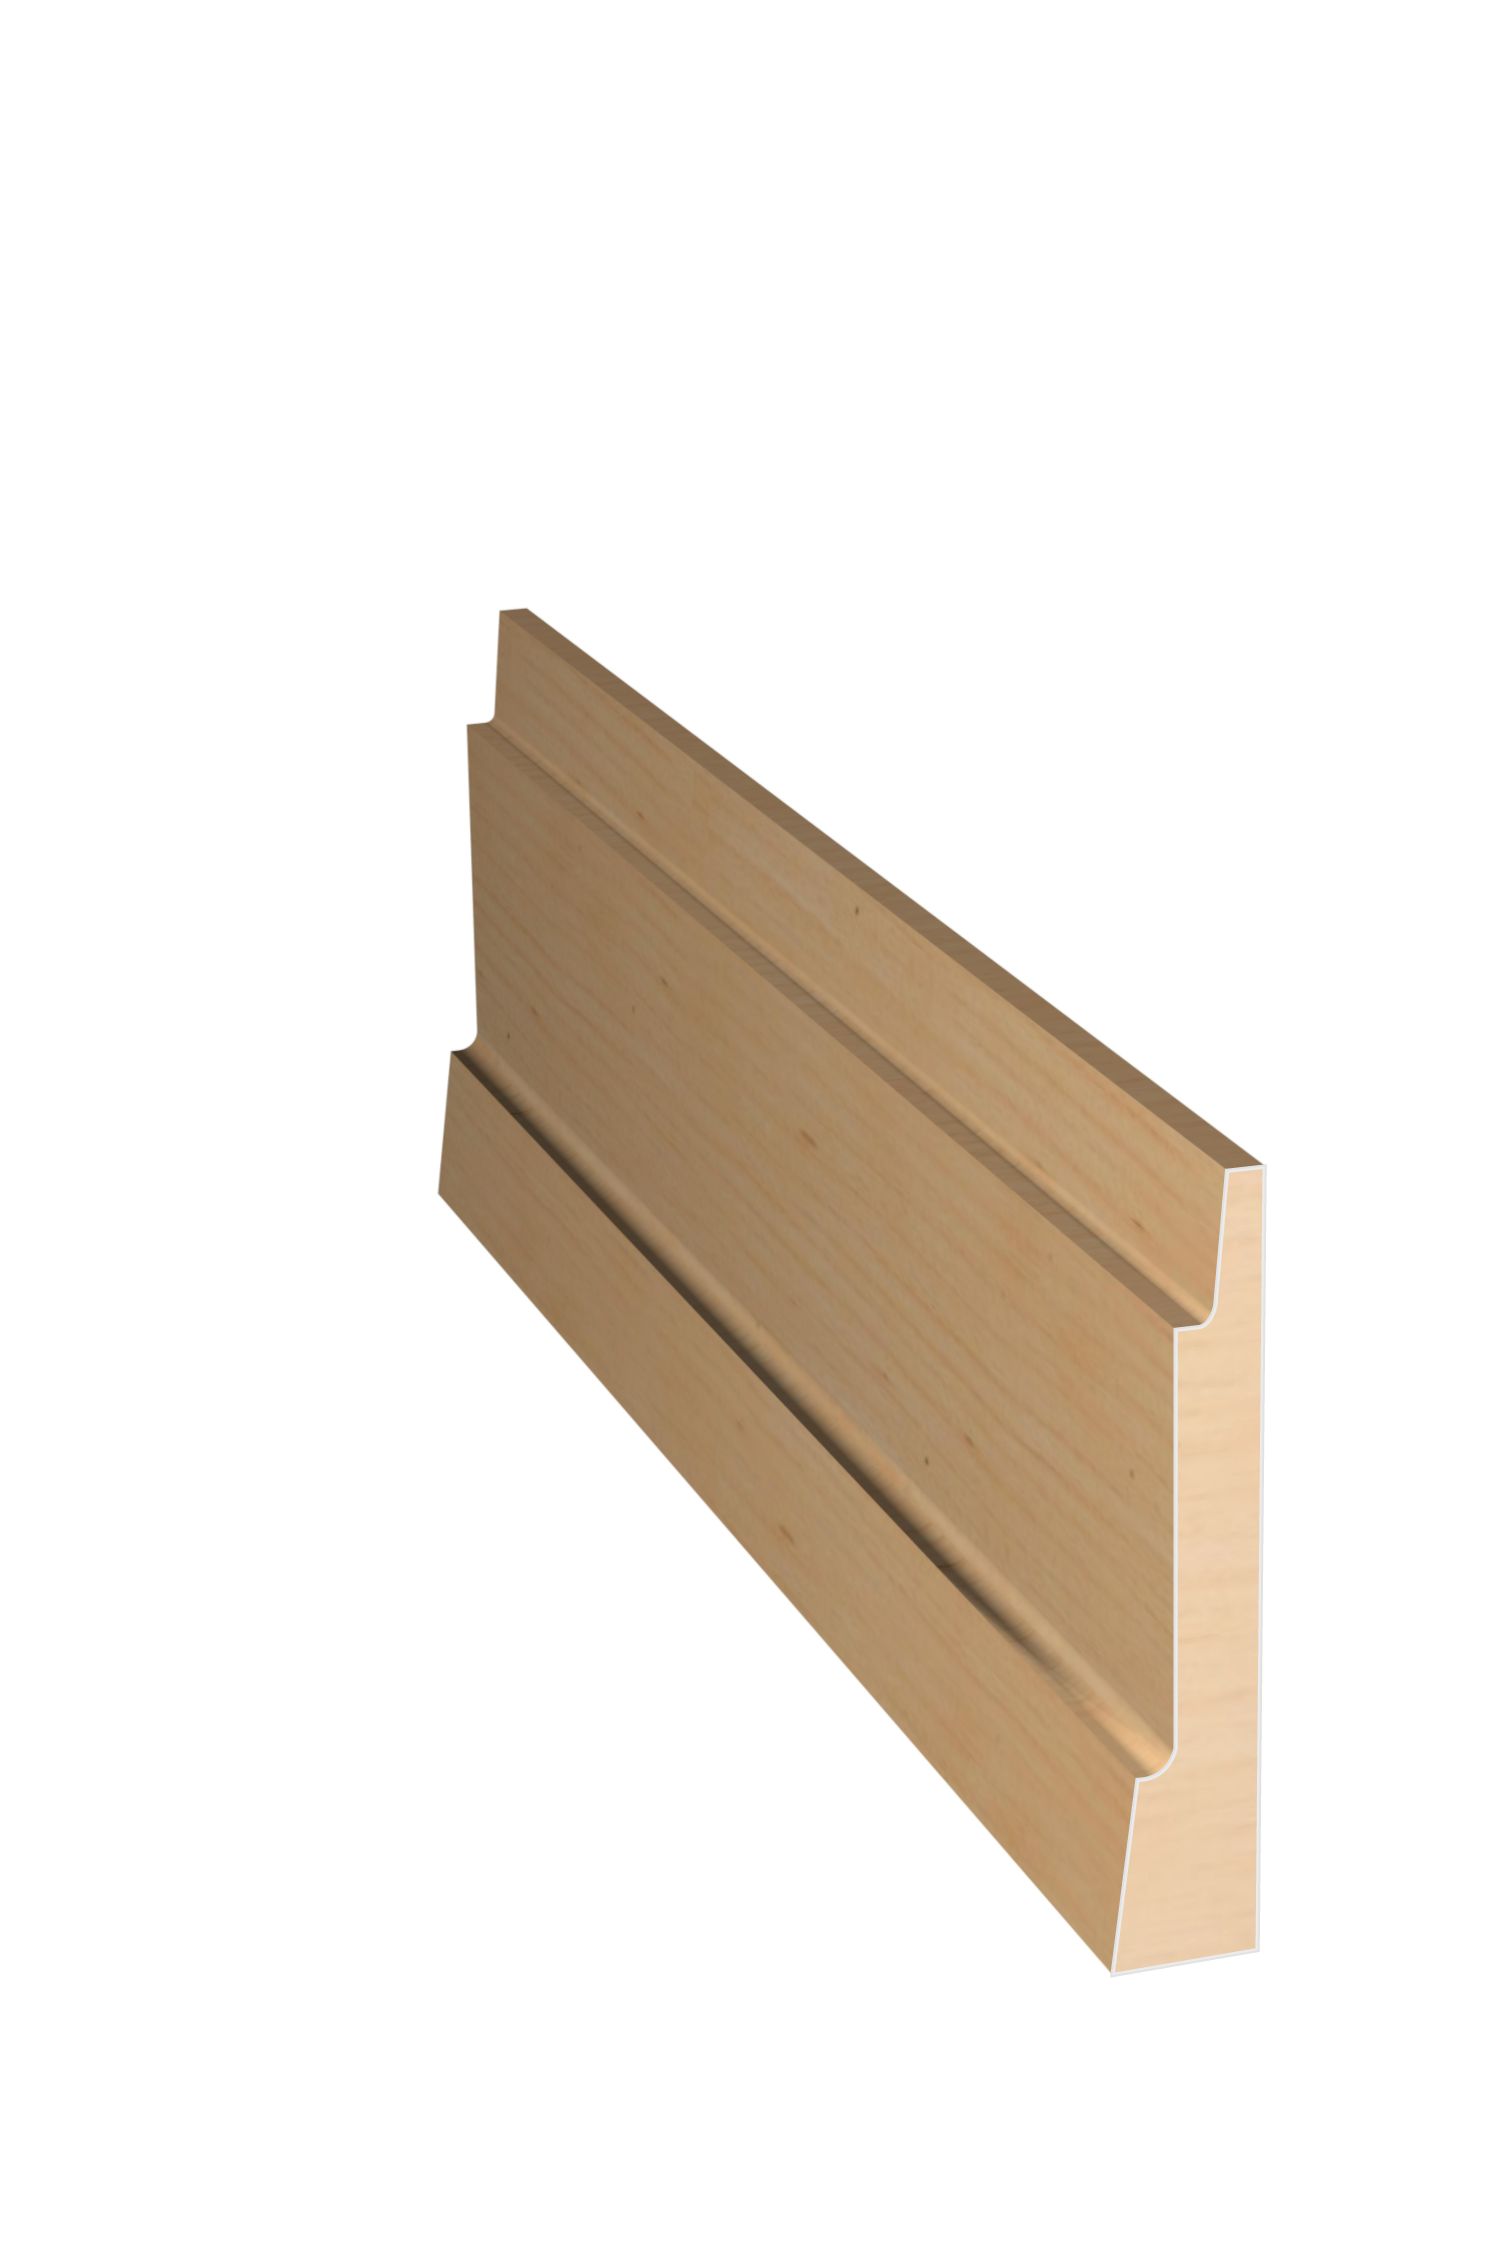 Three dimensional rendering of custom casing wood molding CAPL28 made by Public Lumber Company in Detroit.